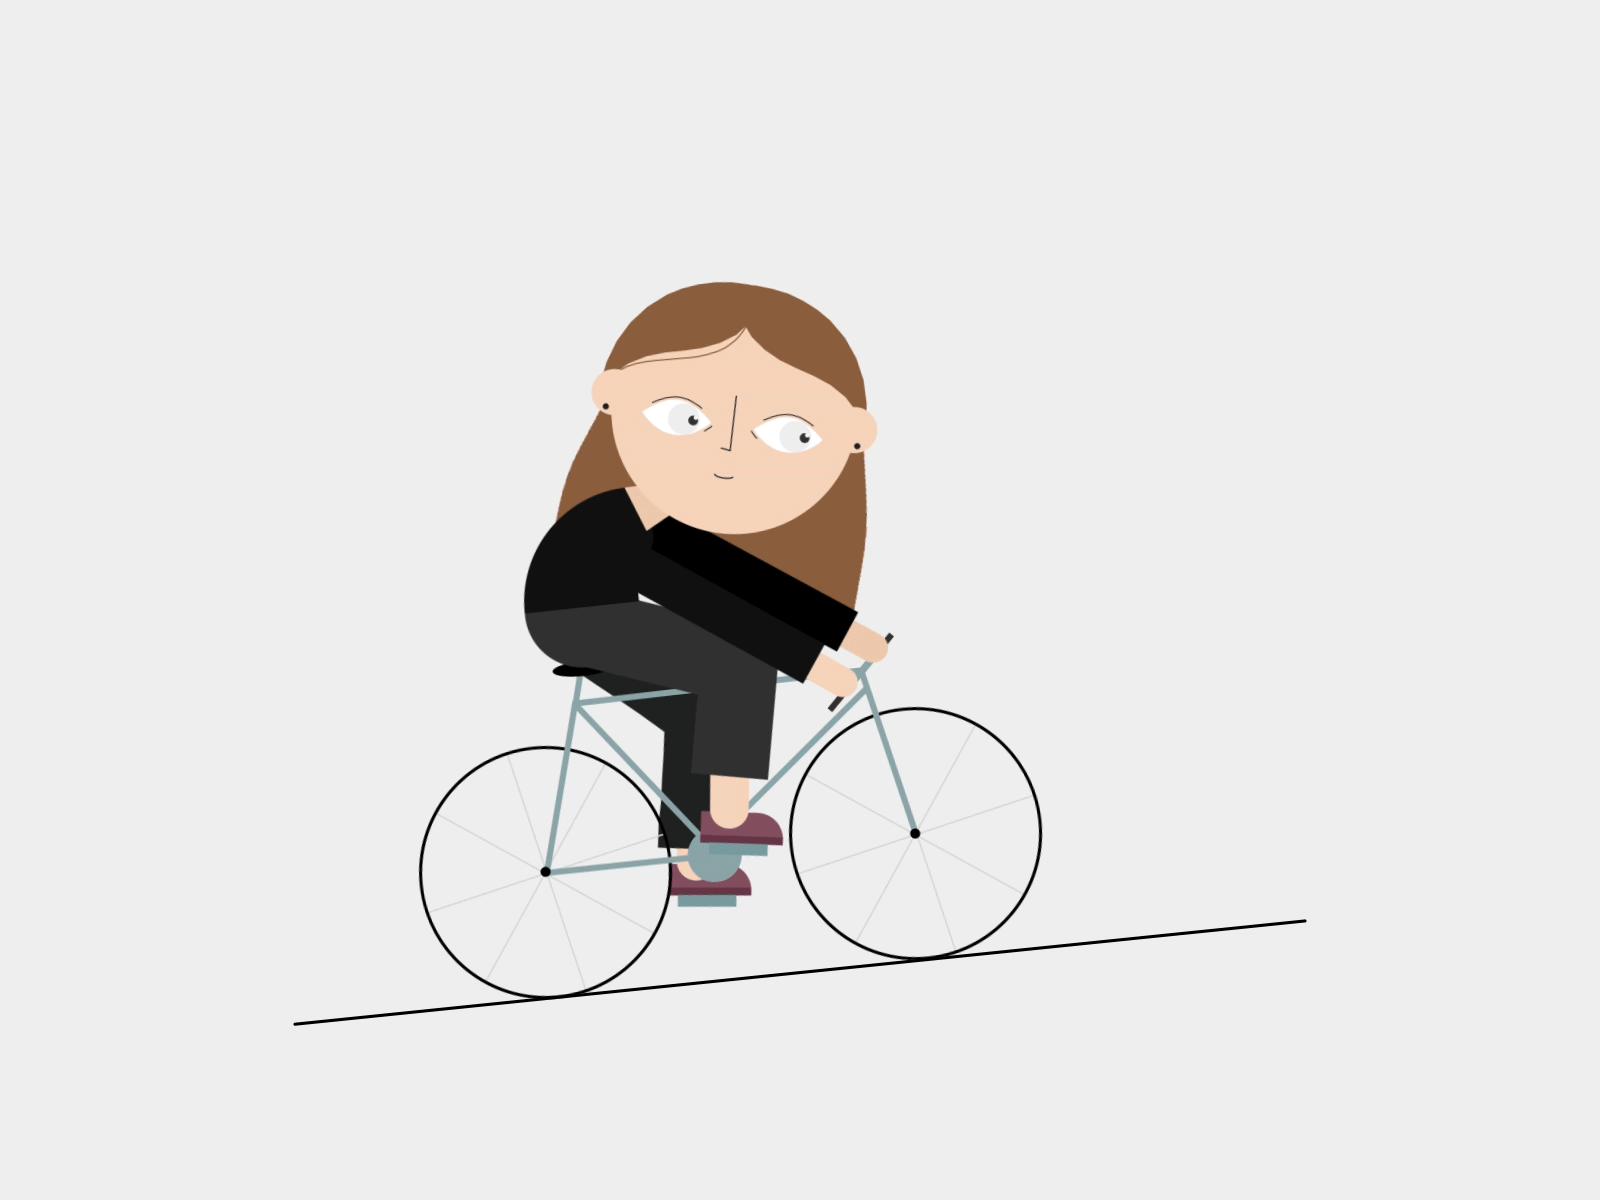 Riding after effects animation animation 2d bike characteranimation characterdesign cycle cycling design girl illustration loop motion graphics new repeat vector